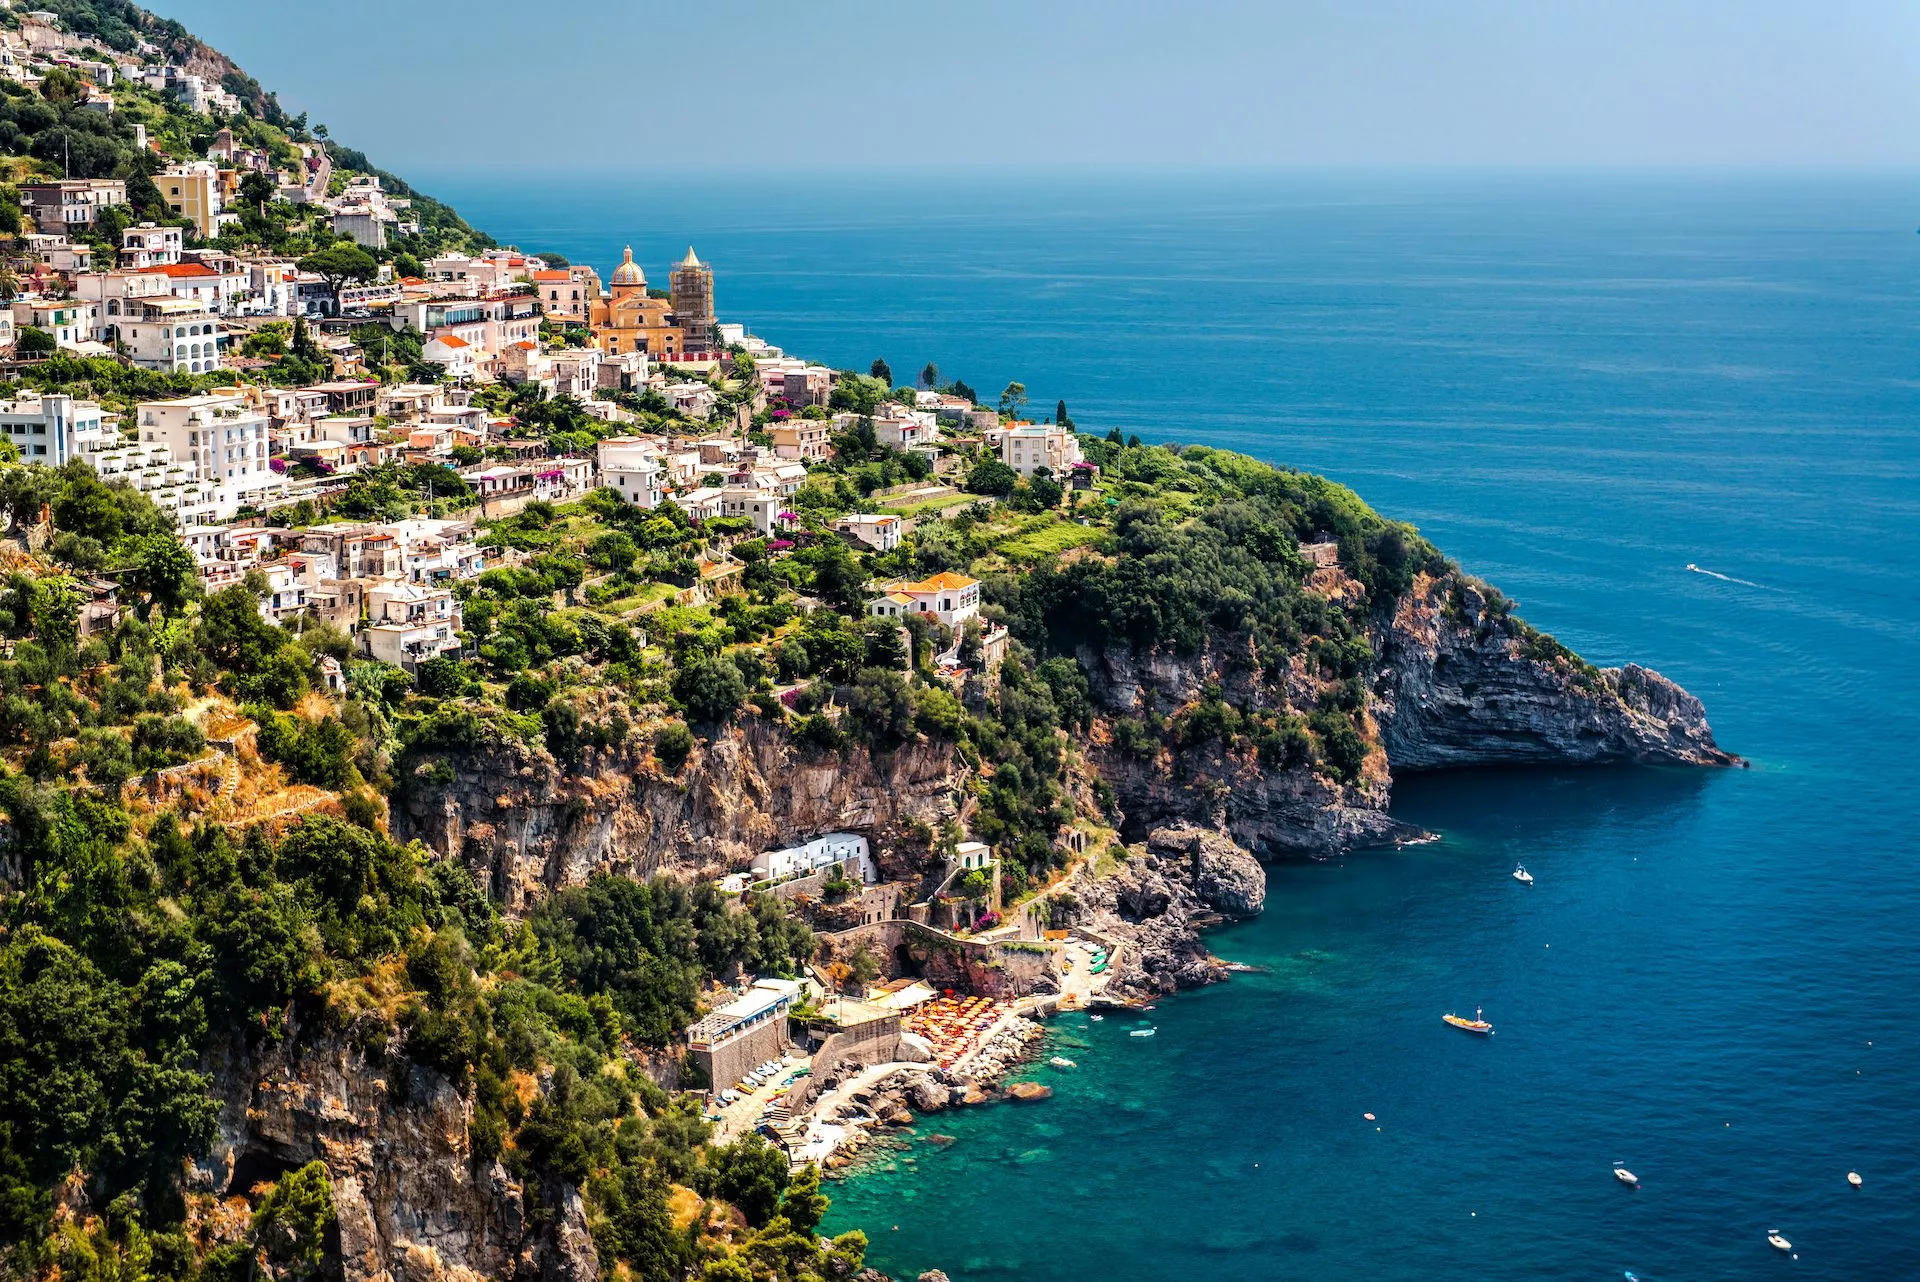 View of praiano praiano is a town and comune of the province of salerno of southwest italy